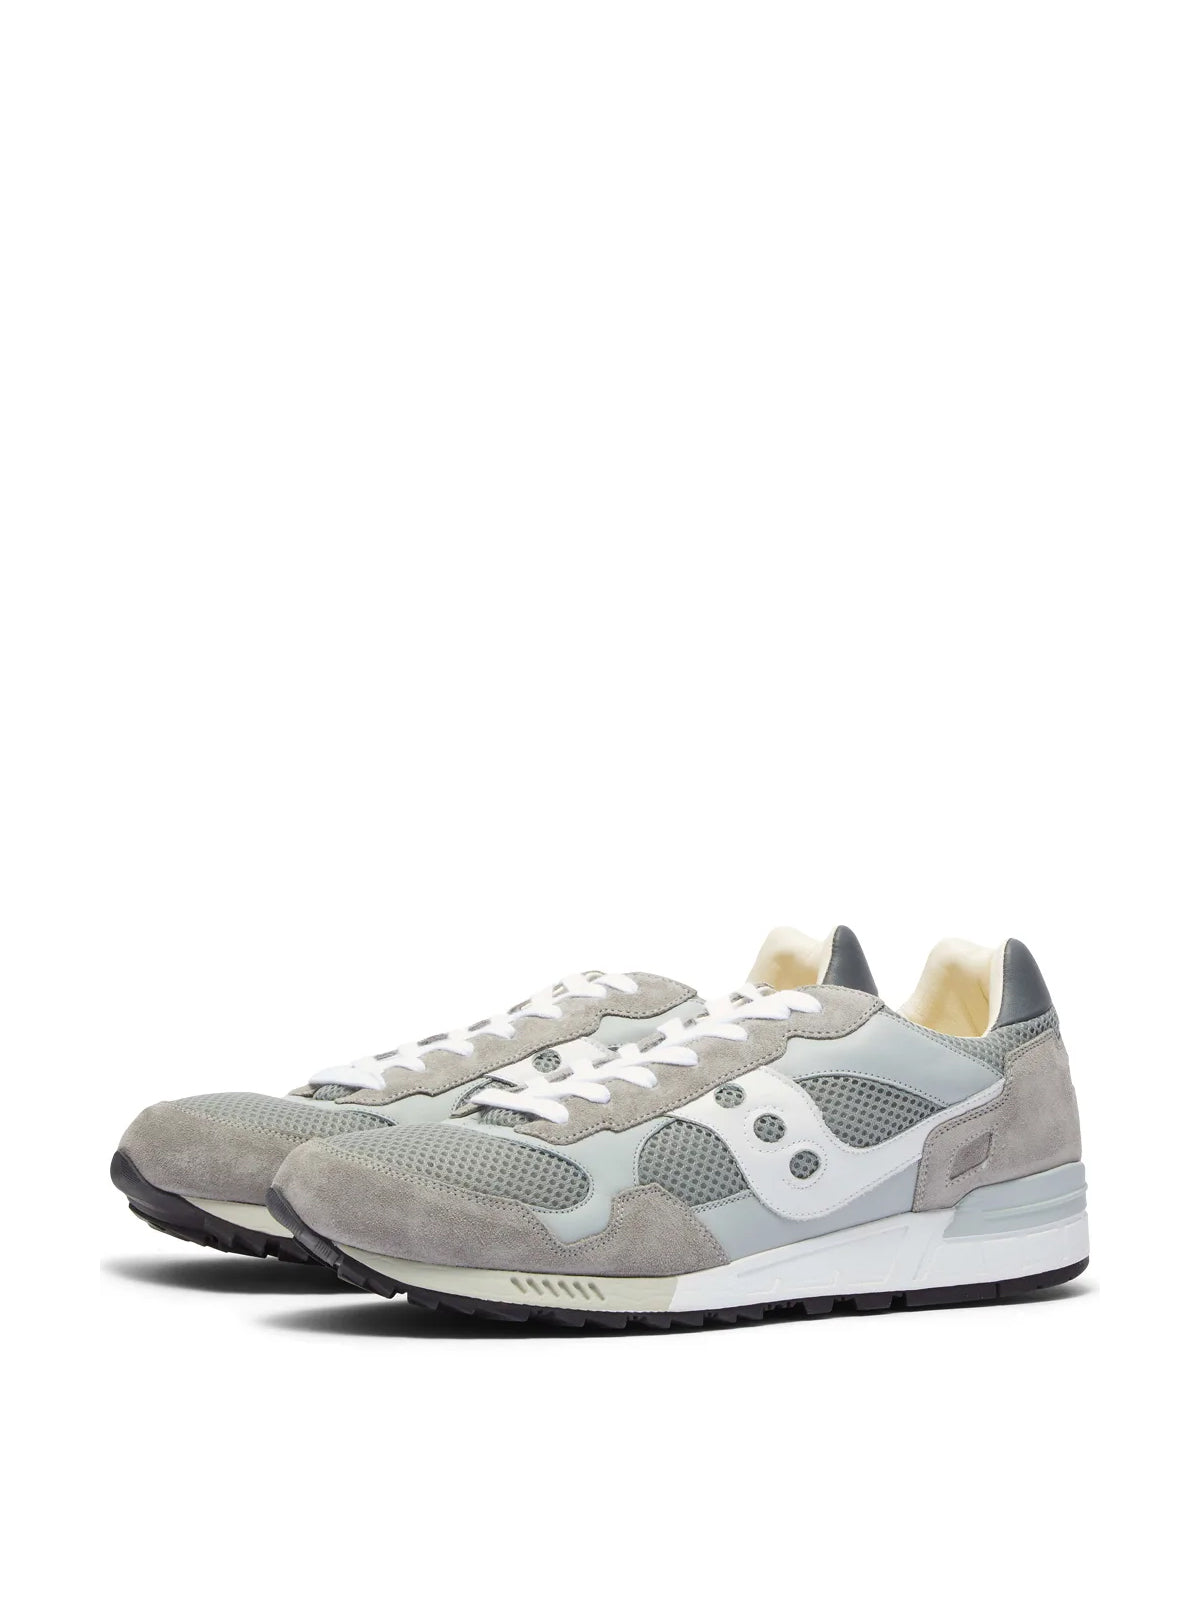 Saucony-OUTLET-SALE-Shadow 5000 Made In Italy Sneakers-ARCHIVIST